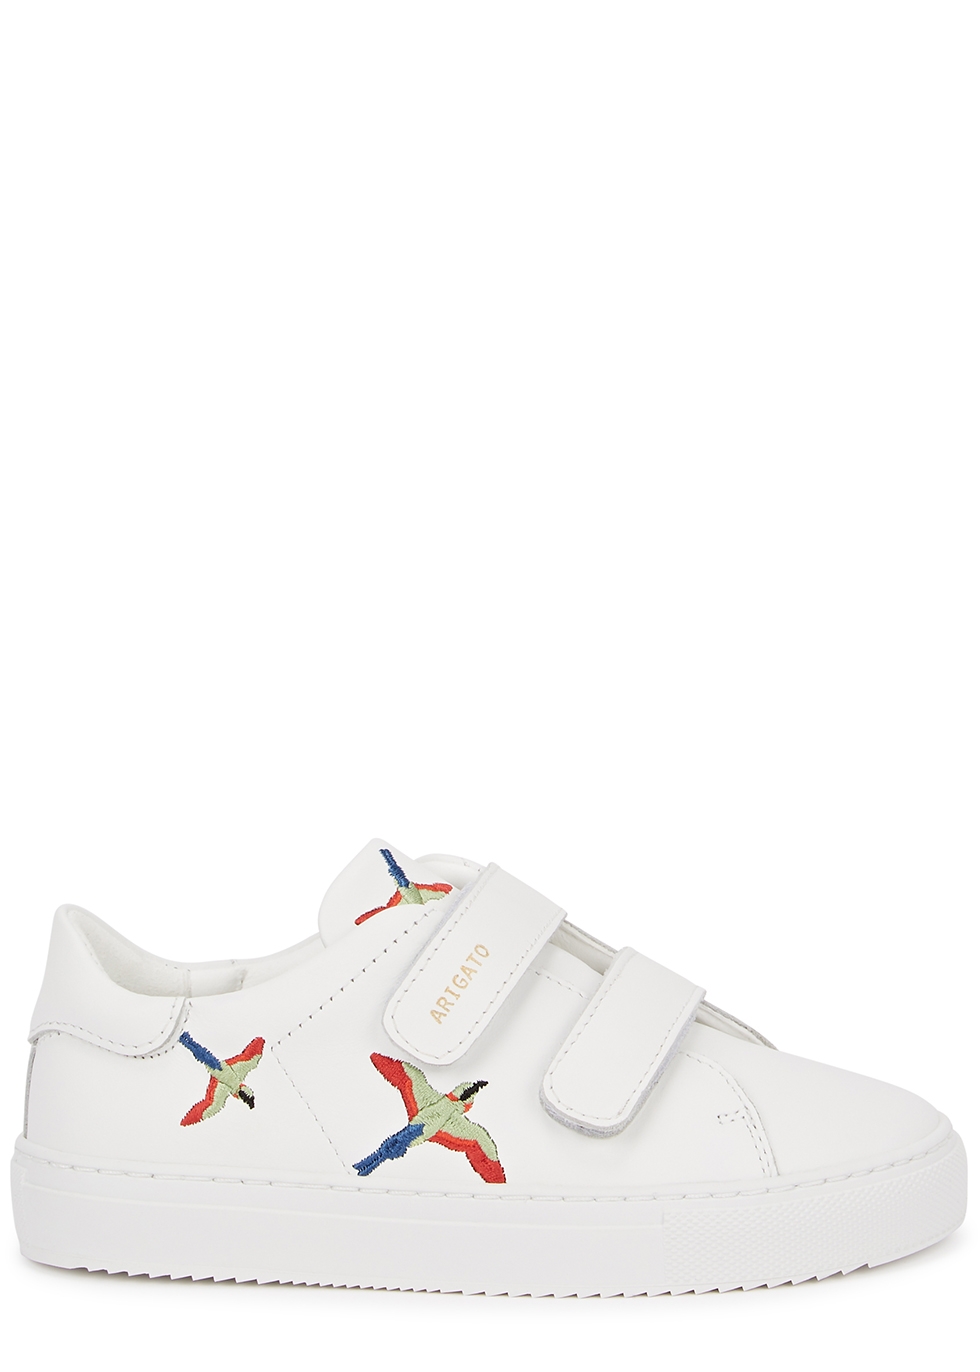 KIDS Clean 90 Bee Birds white leather sneakers